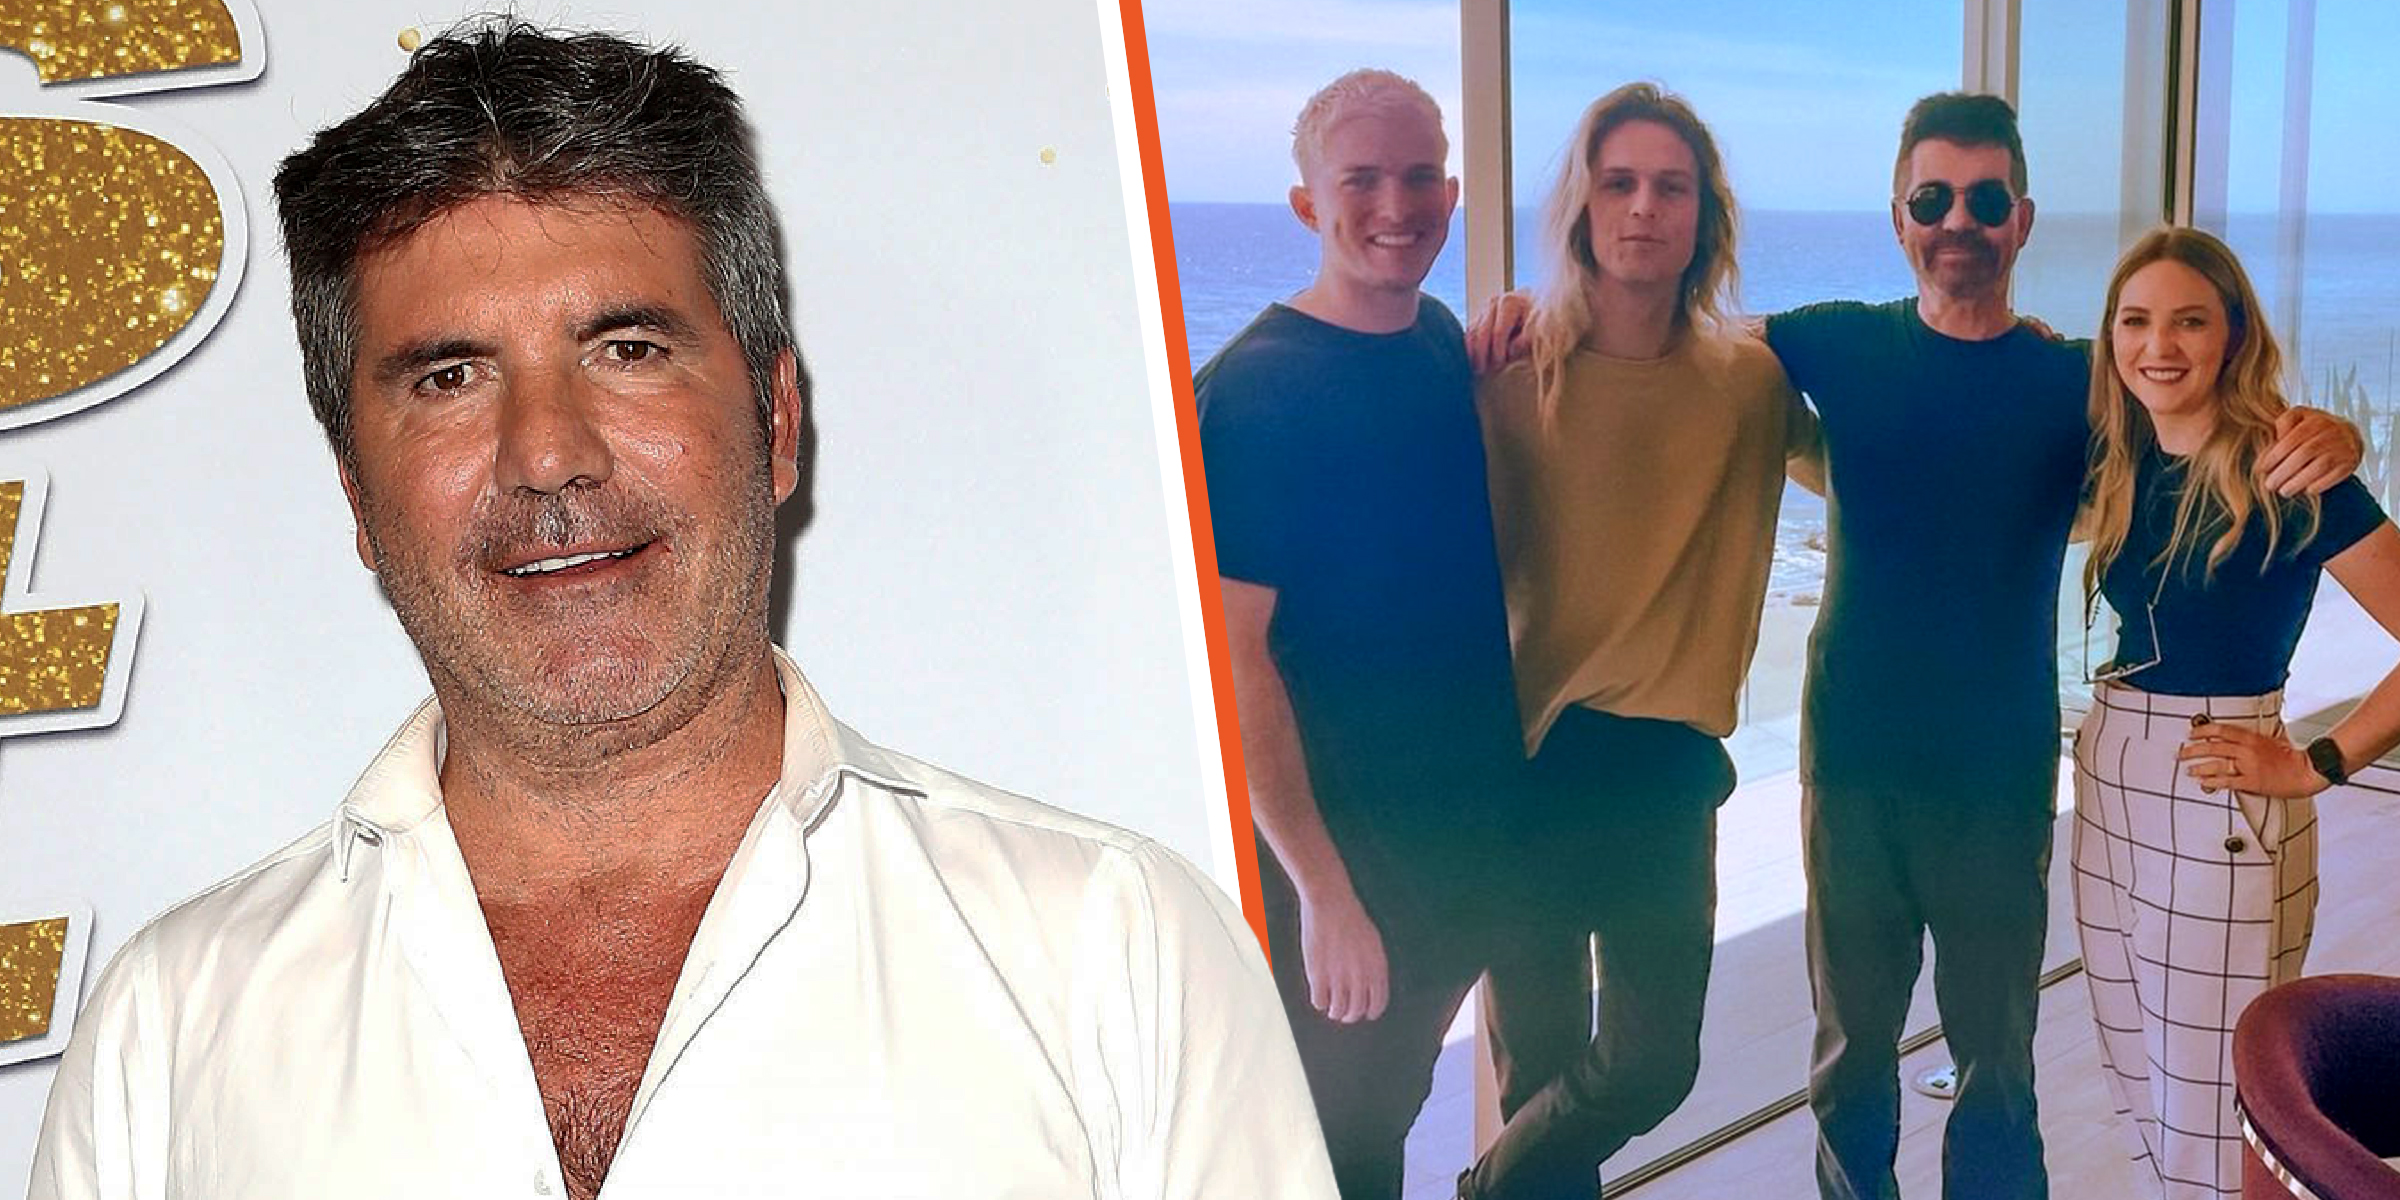 Simon Cowell | Source : Instagram/simoncowell / Getty Images